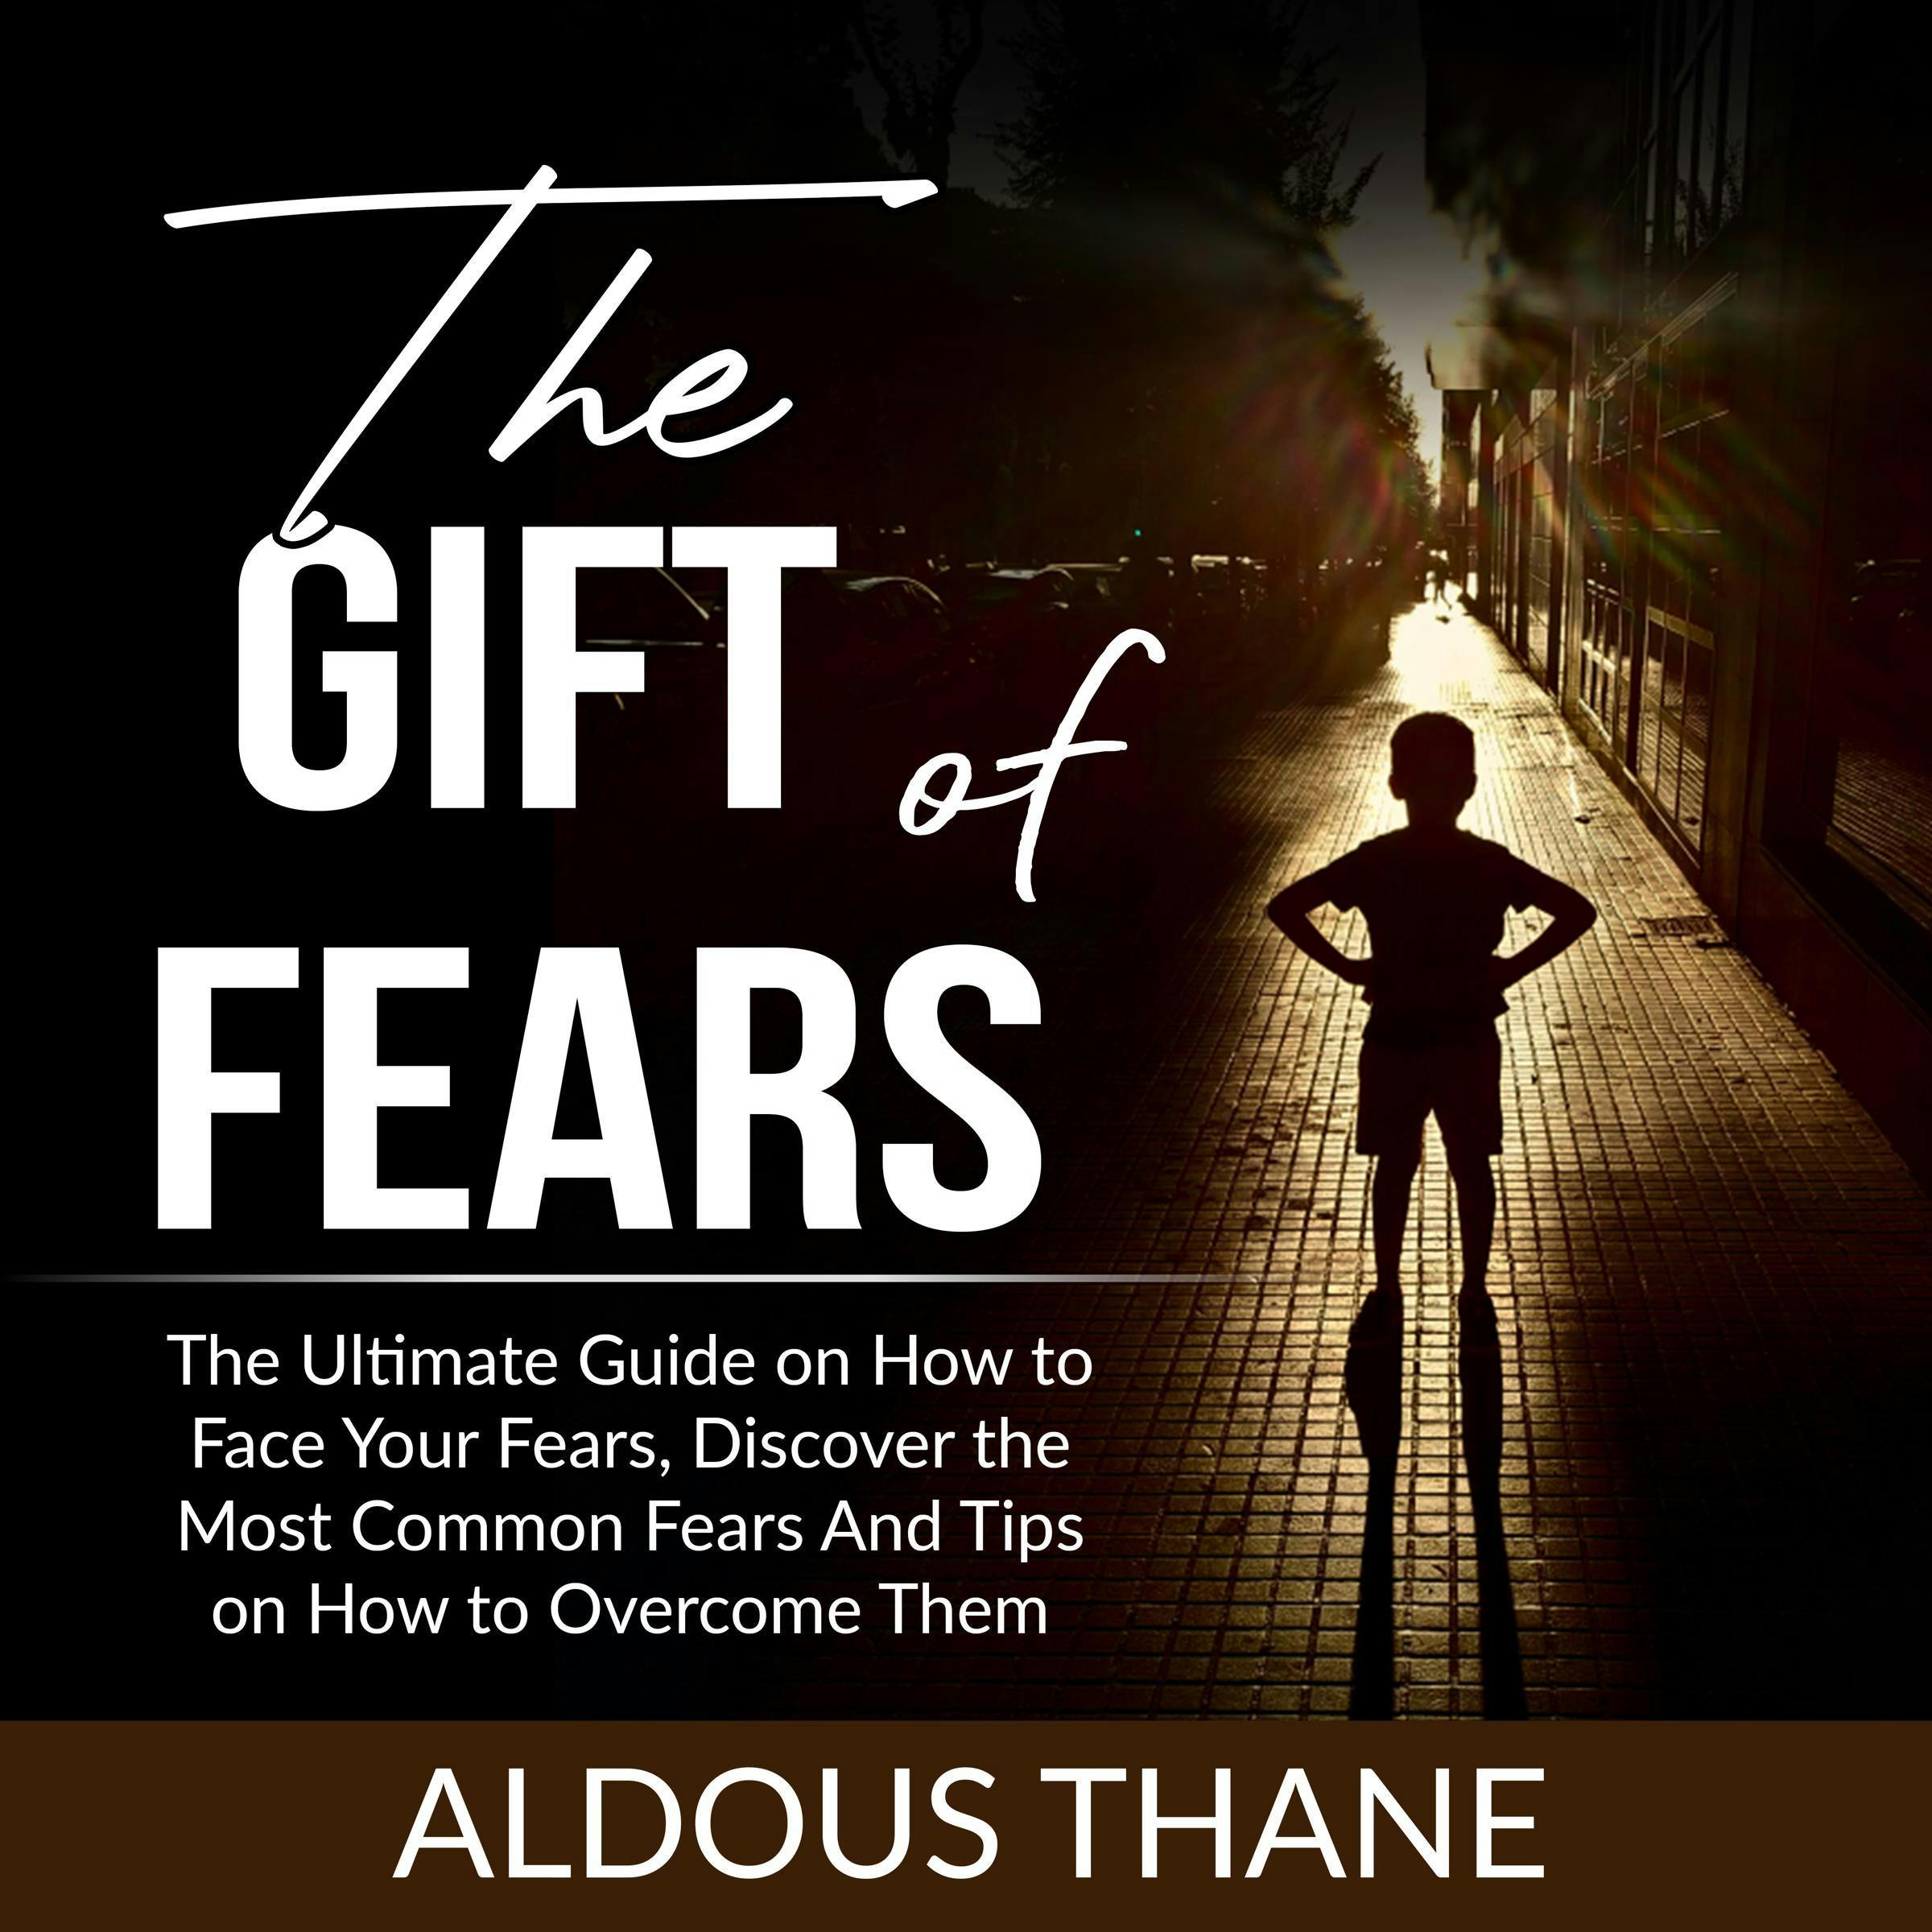 The Gift of Fears: The Ultimate Guide on How to Face Your Fears, Discover the Most Common Fears And Tips on How to Overcome Them - Aldous Thane